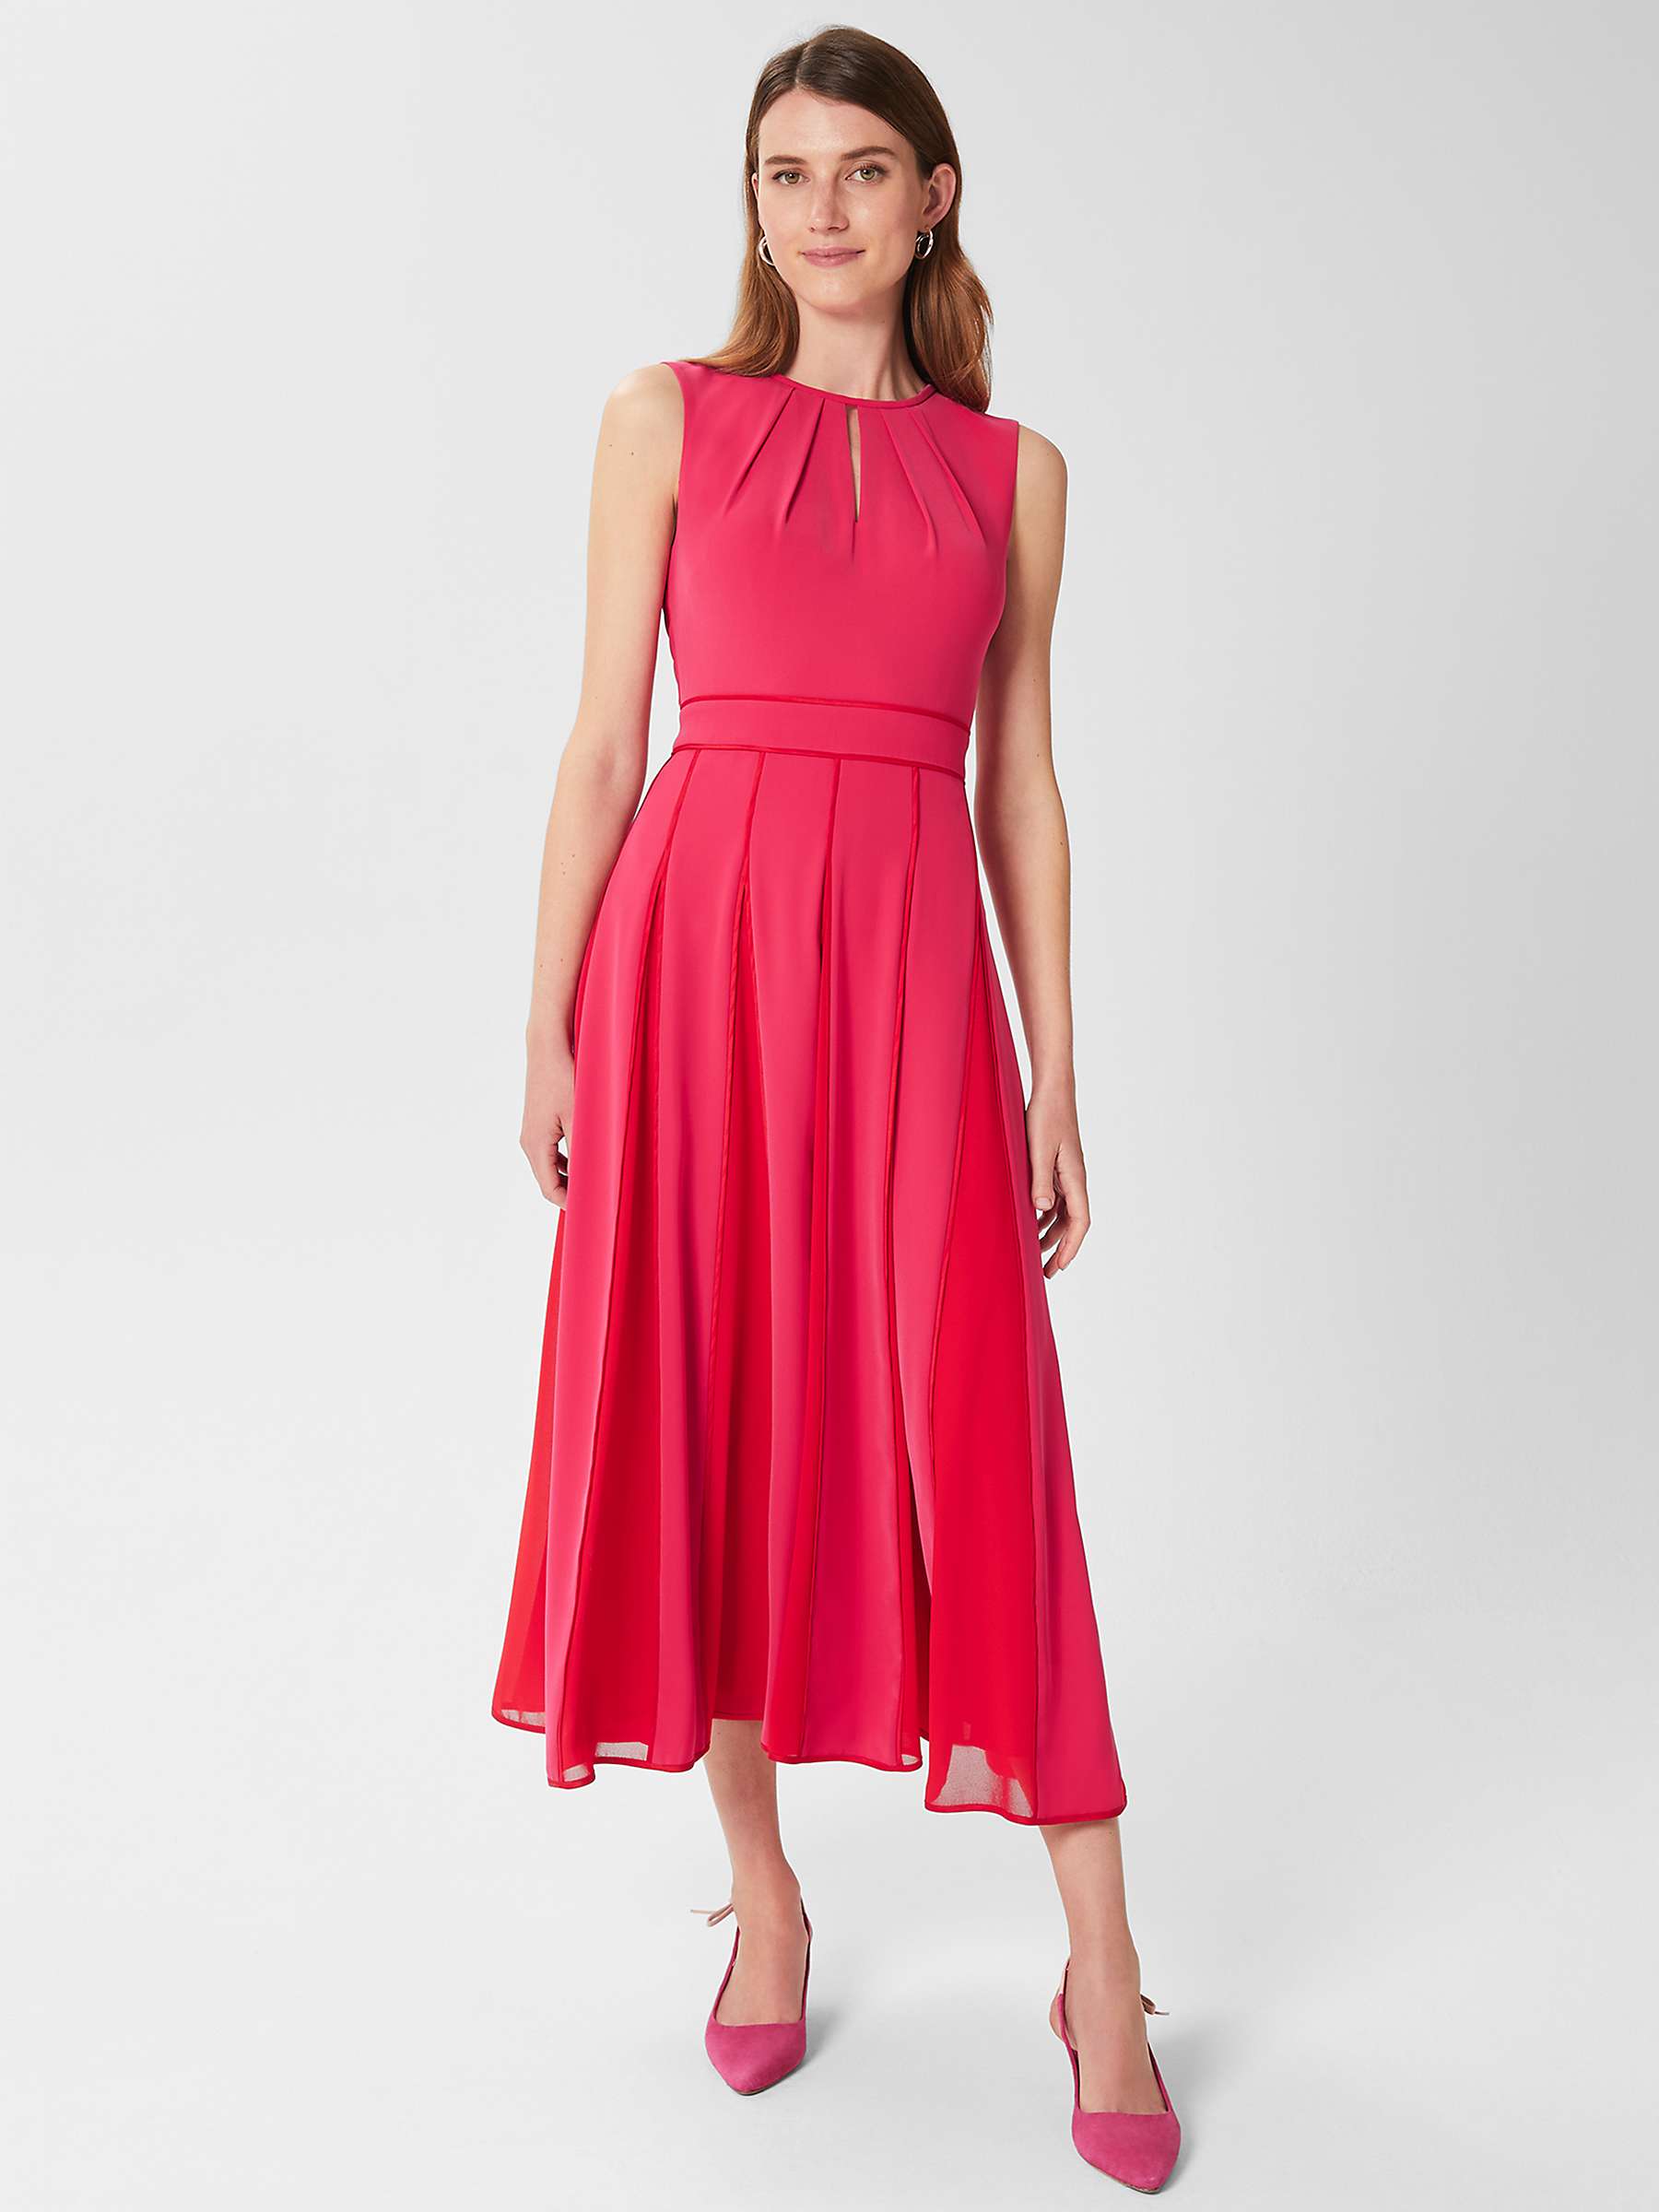 Hobbs Angelica Flared Midi Dress, Pink/Red at John Lewis & Partners